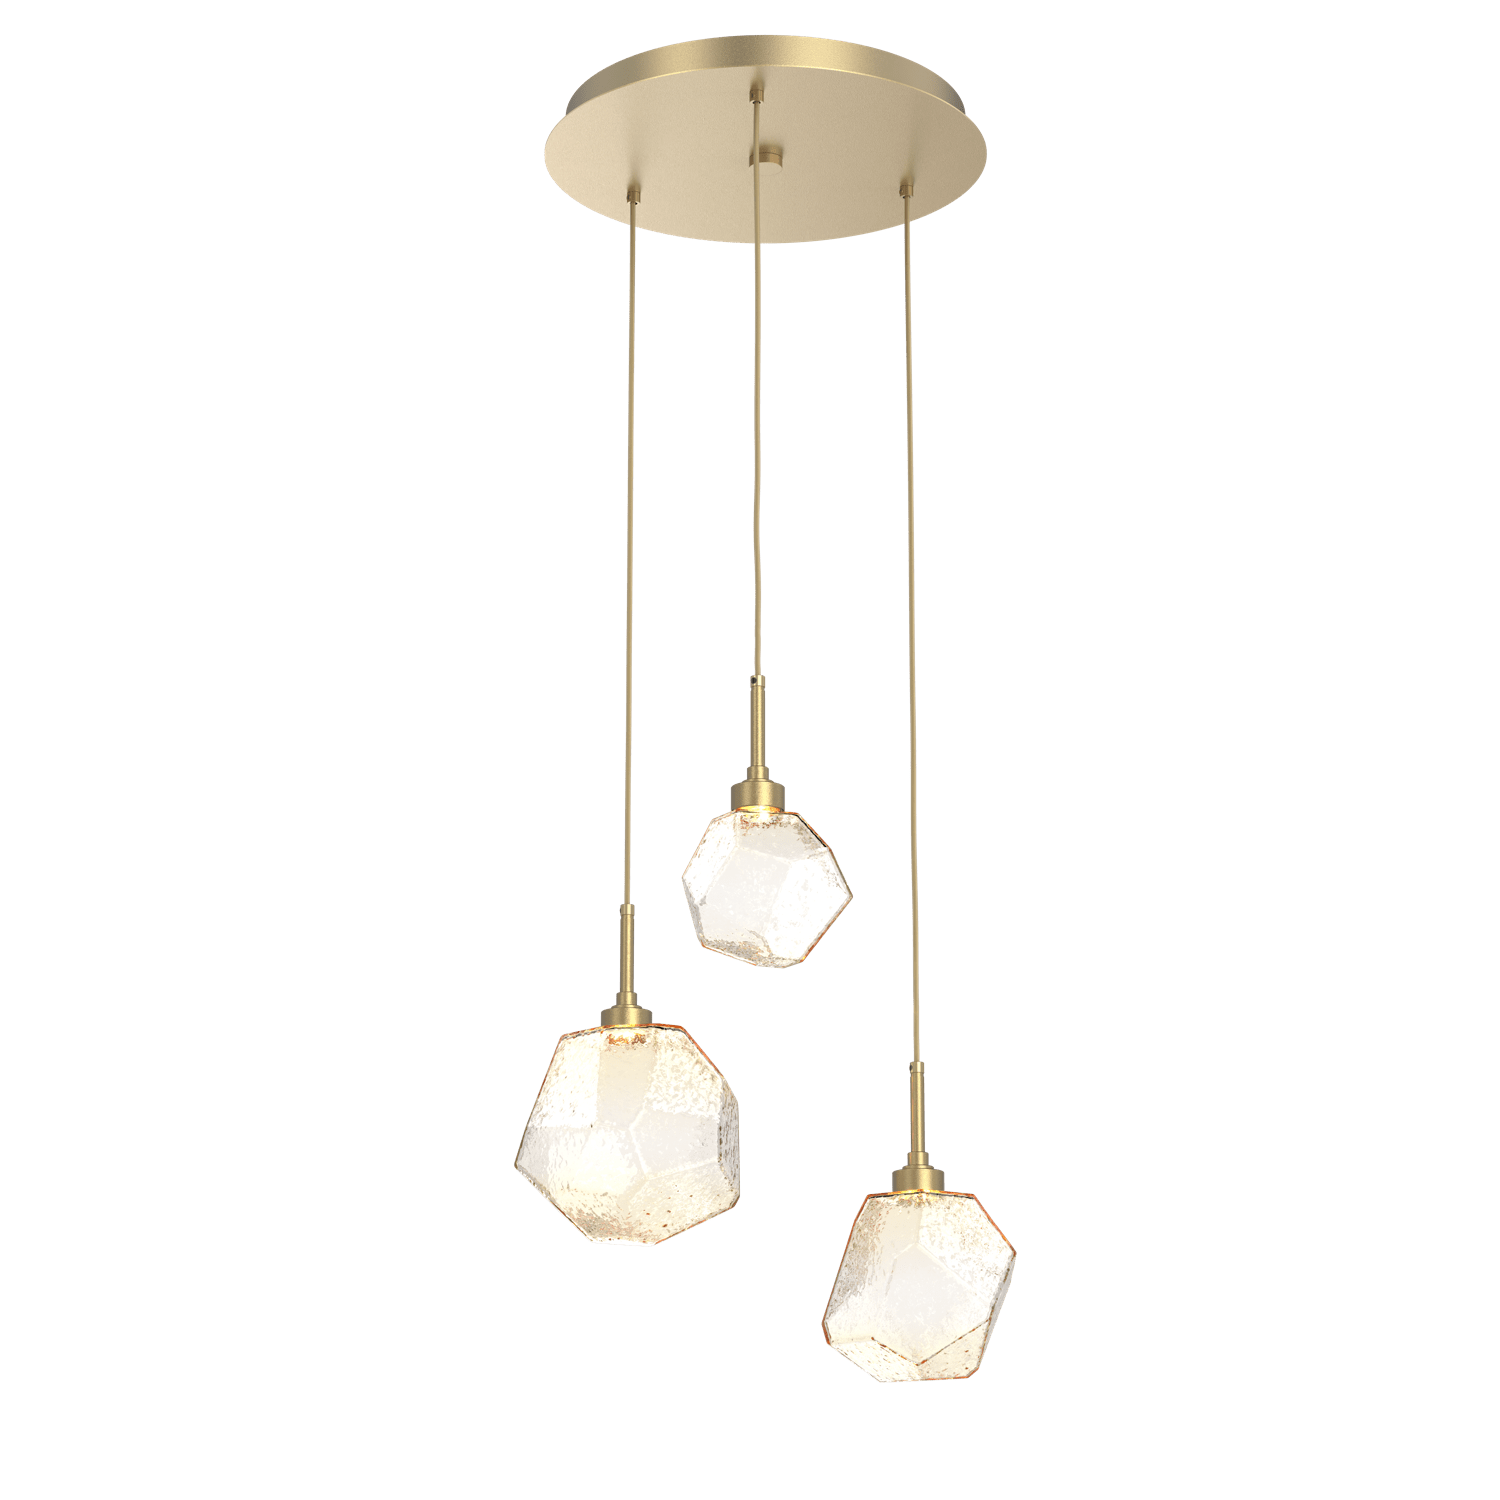 CHB0039-03-GB-A-Hammerton-Studio-Gem-3-light-round-pendant-chandelier-with-gilded-brass-finish-and-amber-blown-glass-shades-and-LED-lamping